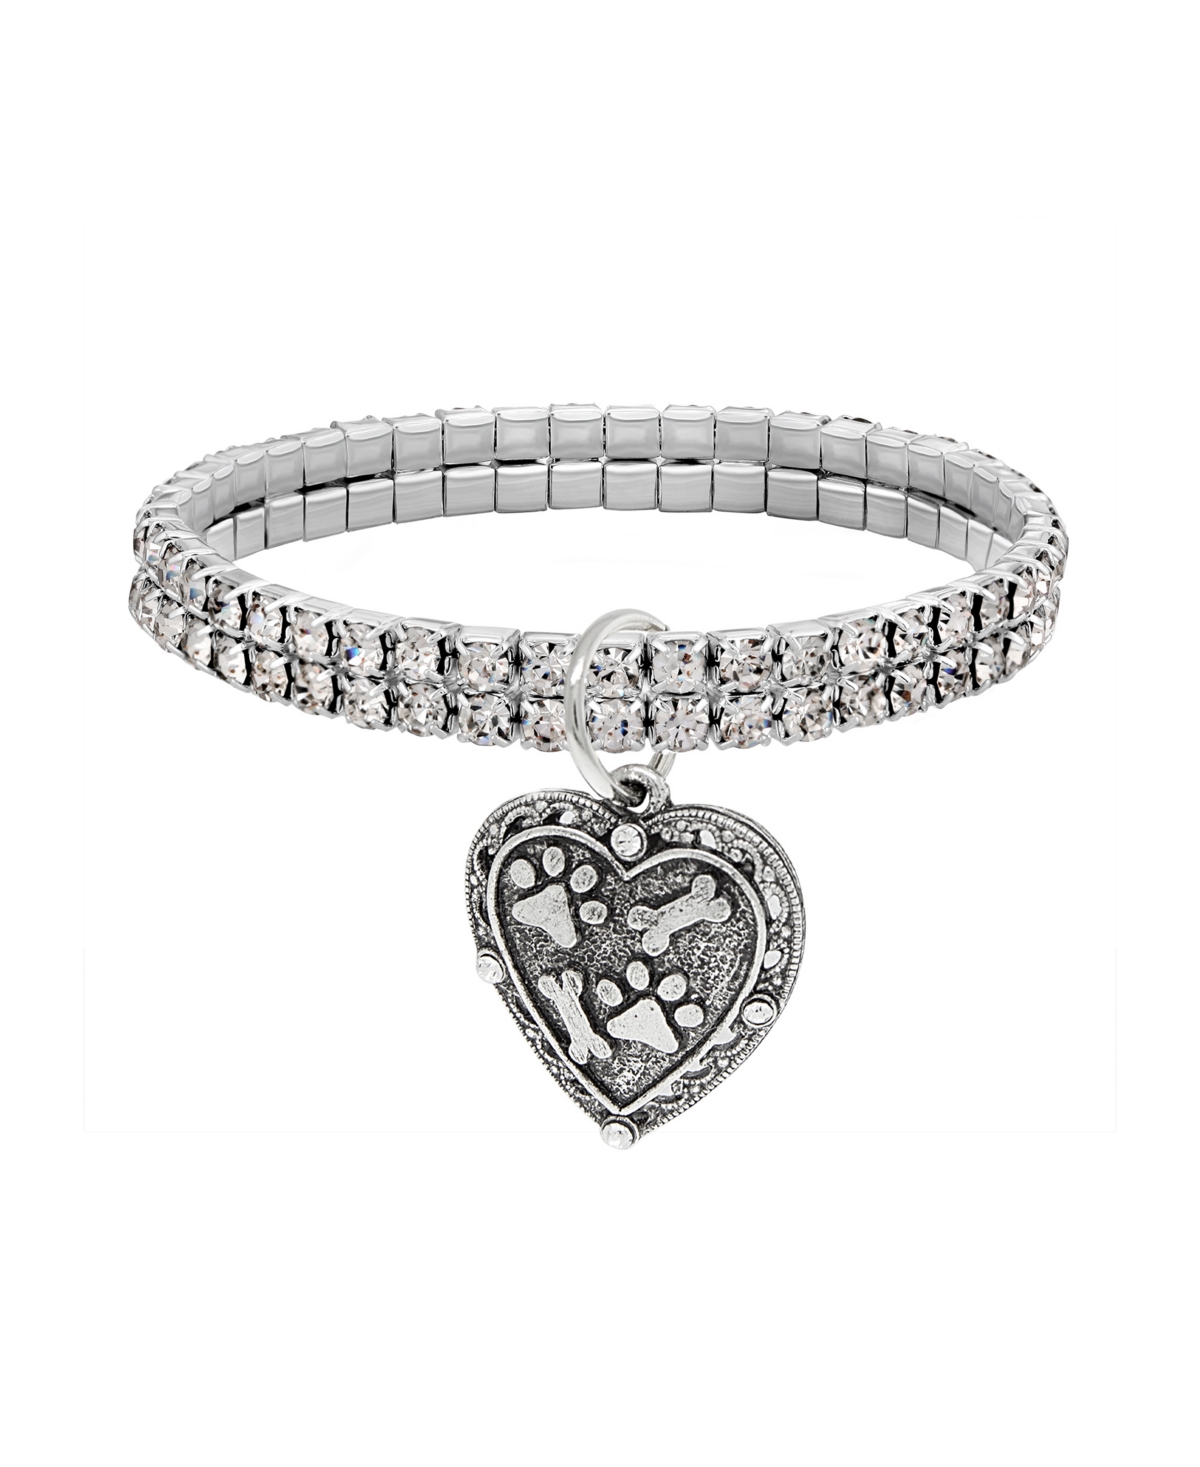 2028 Silver-tone Two Row Crystal Stretch Bracelet With Paw And Bones Heart Charm In Clear